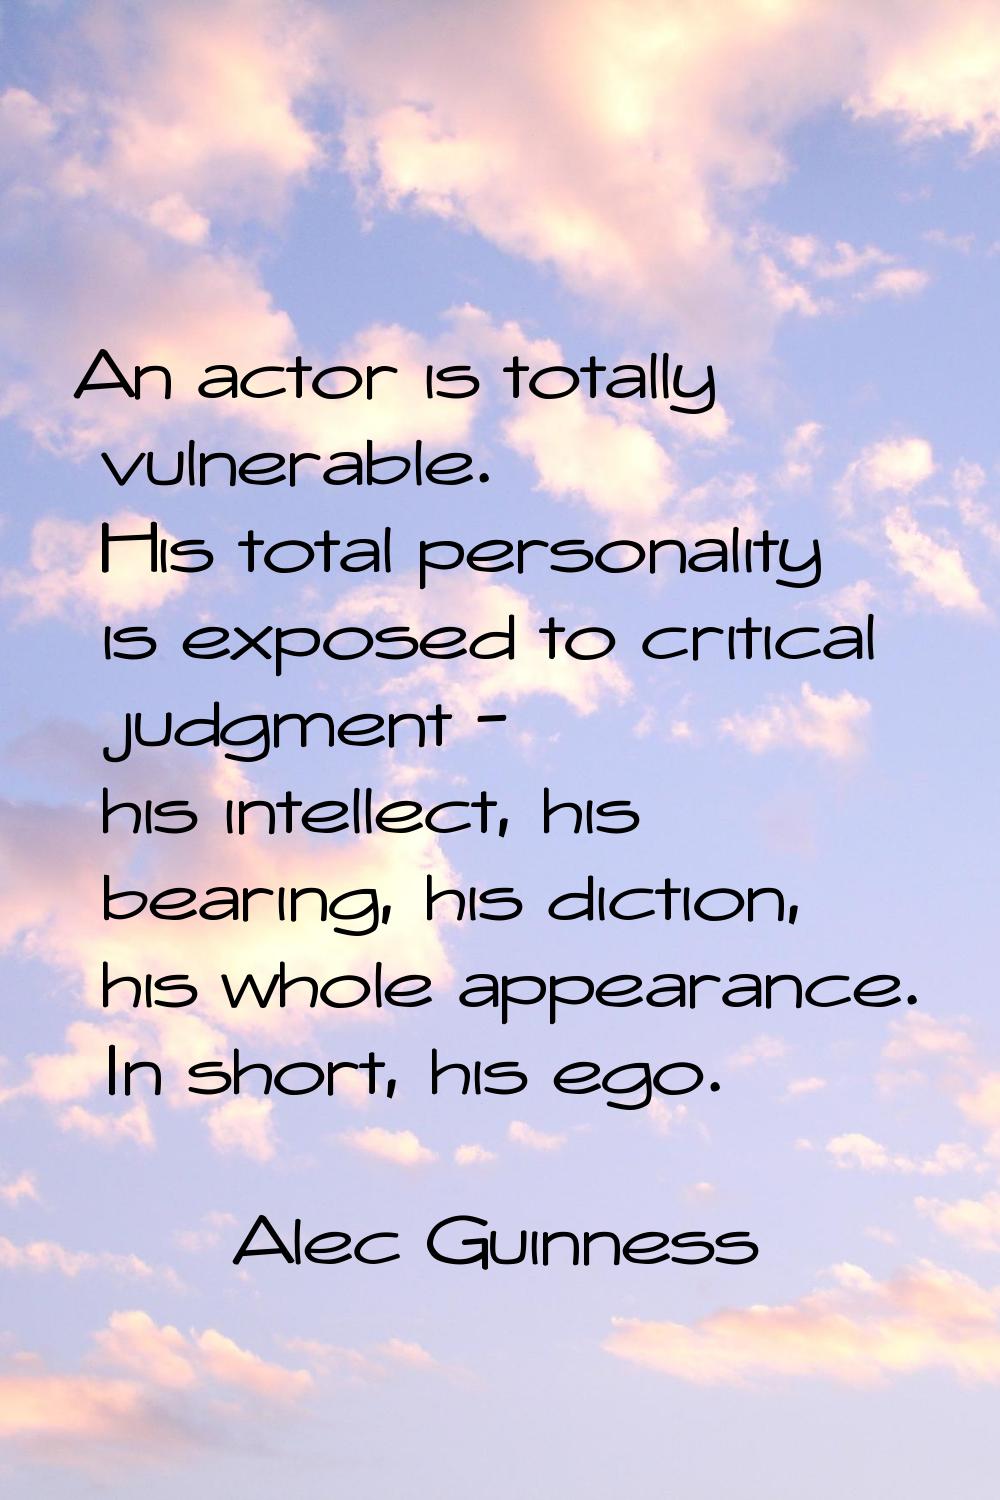 An actor is totally vulnerable. His total personality is exposed to critical judgment - his intelle